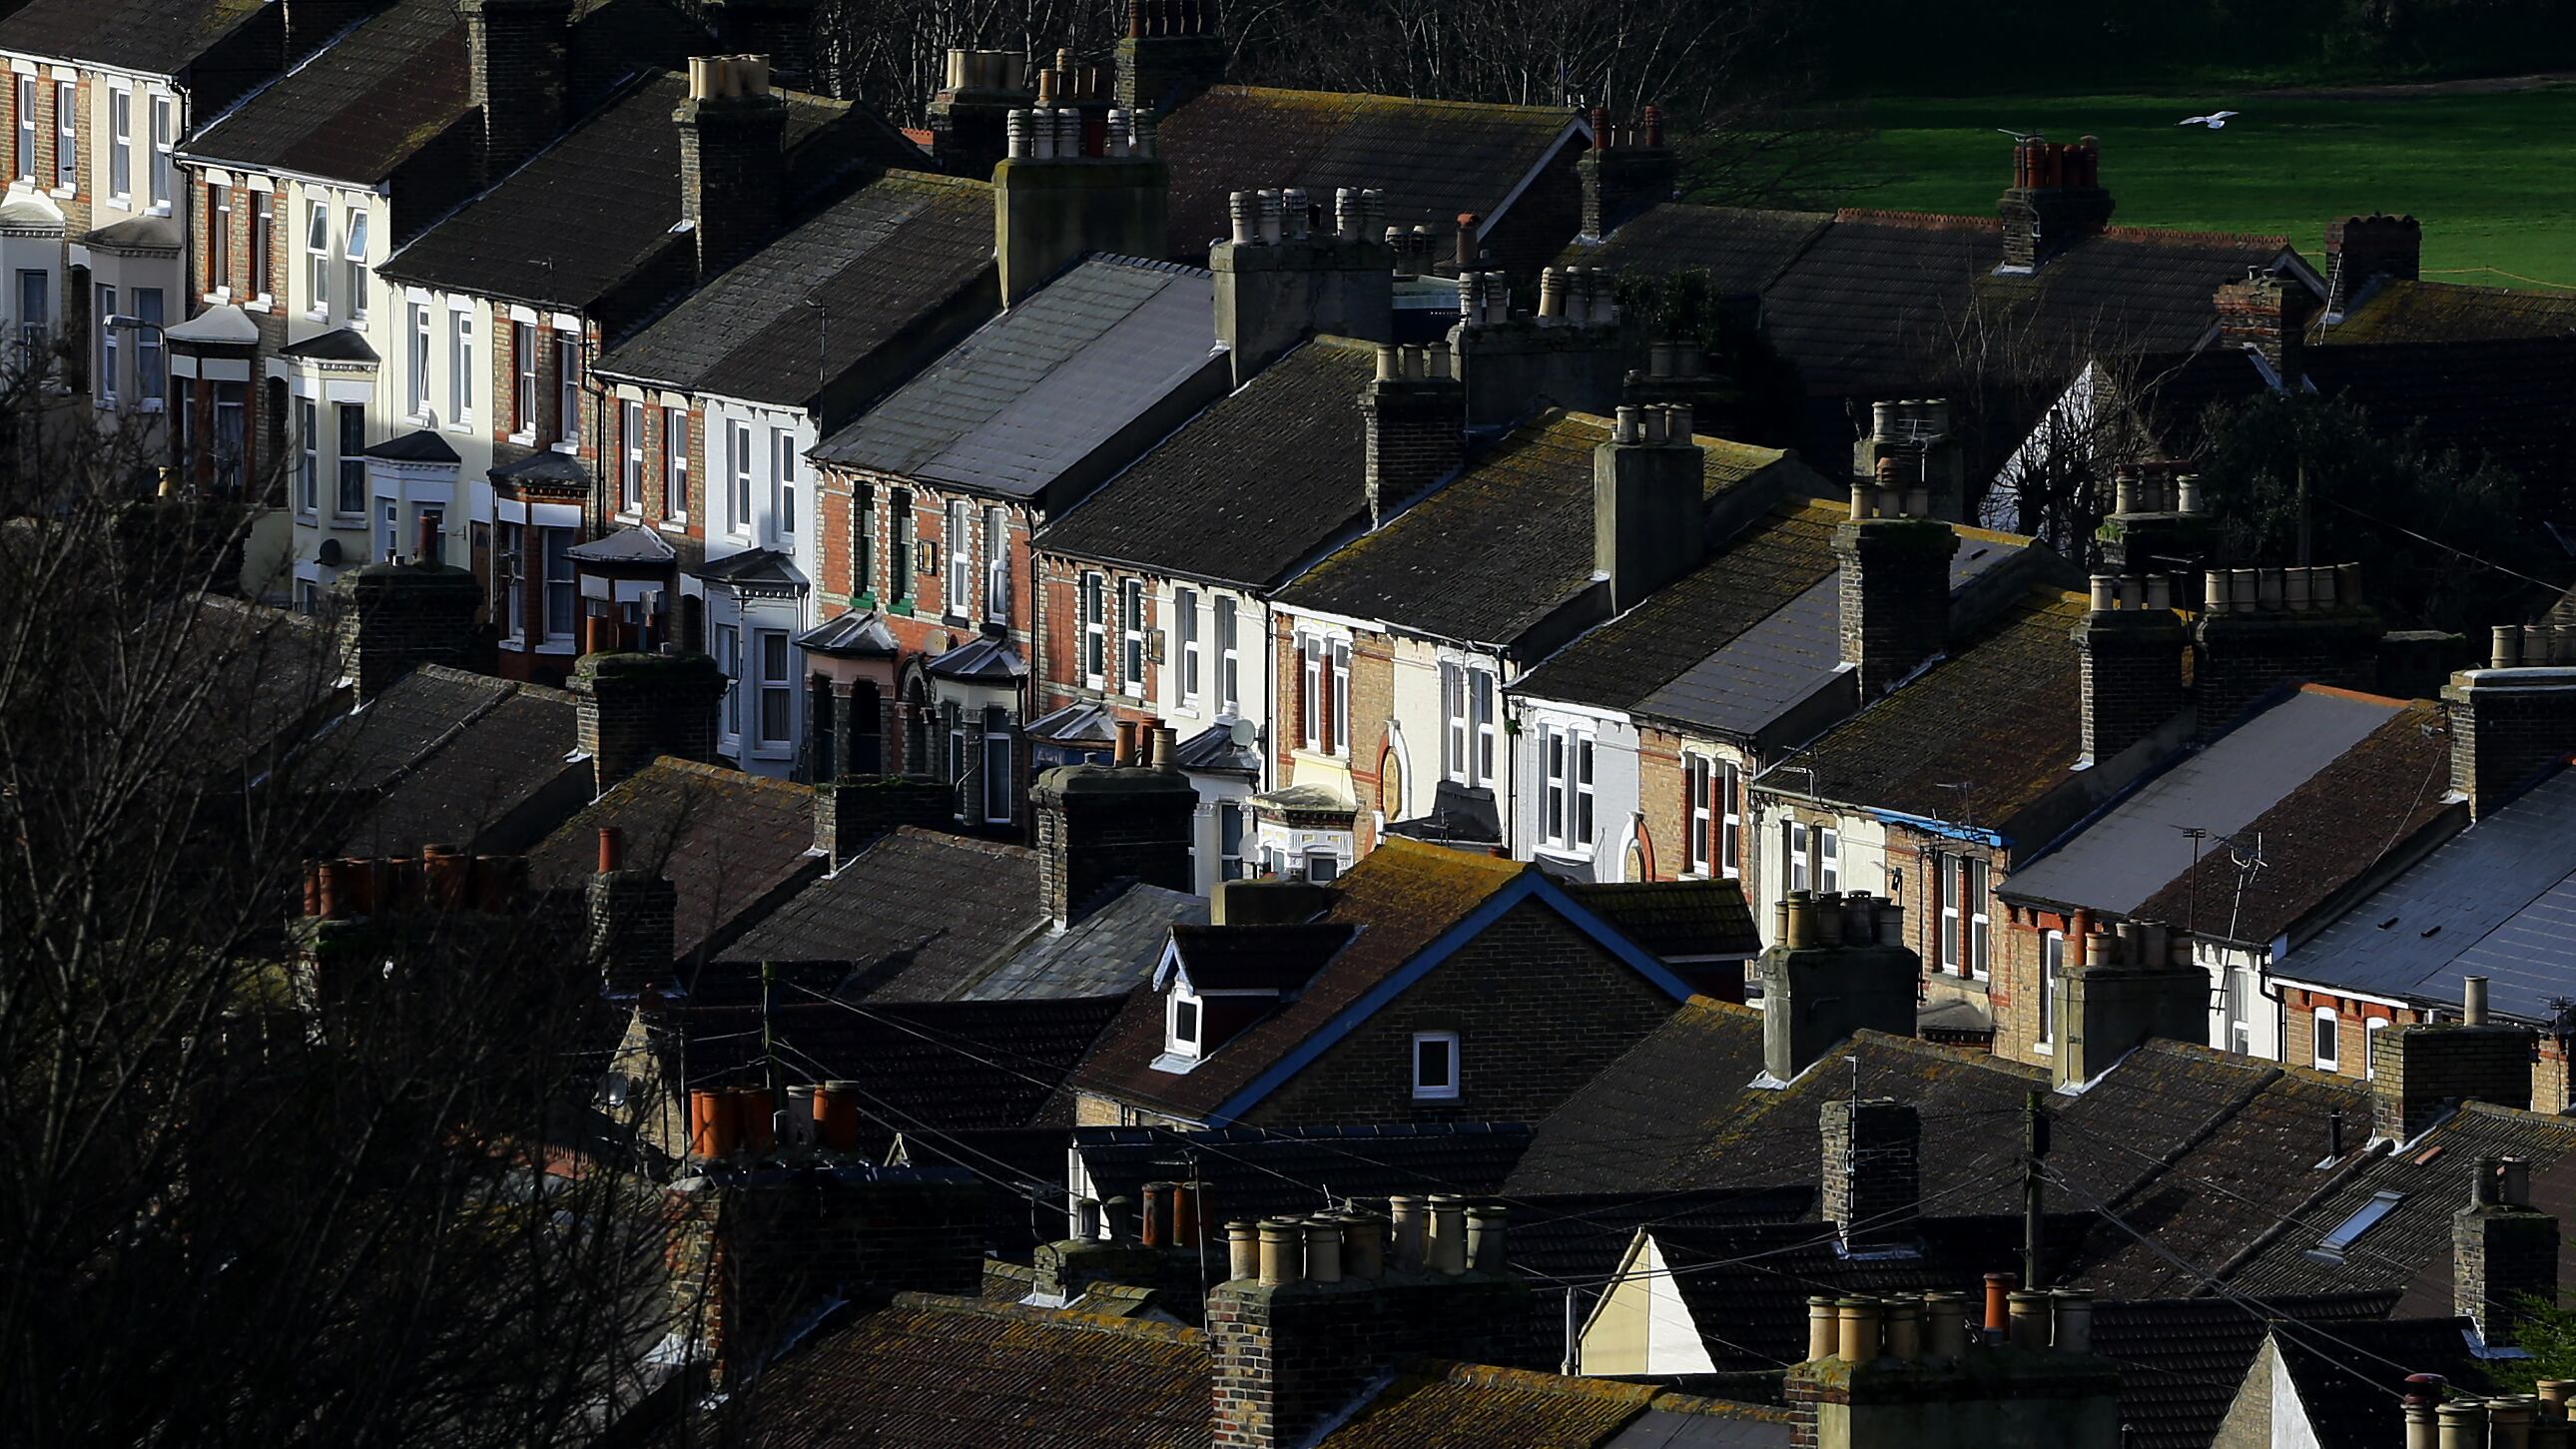 The average UK house price rose by 0.1% in April month-on-month, after a fall of 0.9% in March, according to Halifax